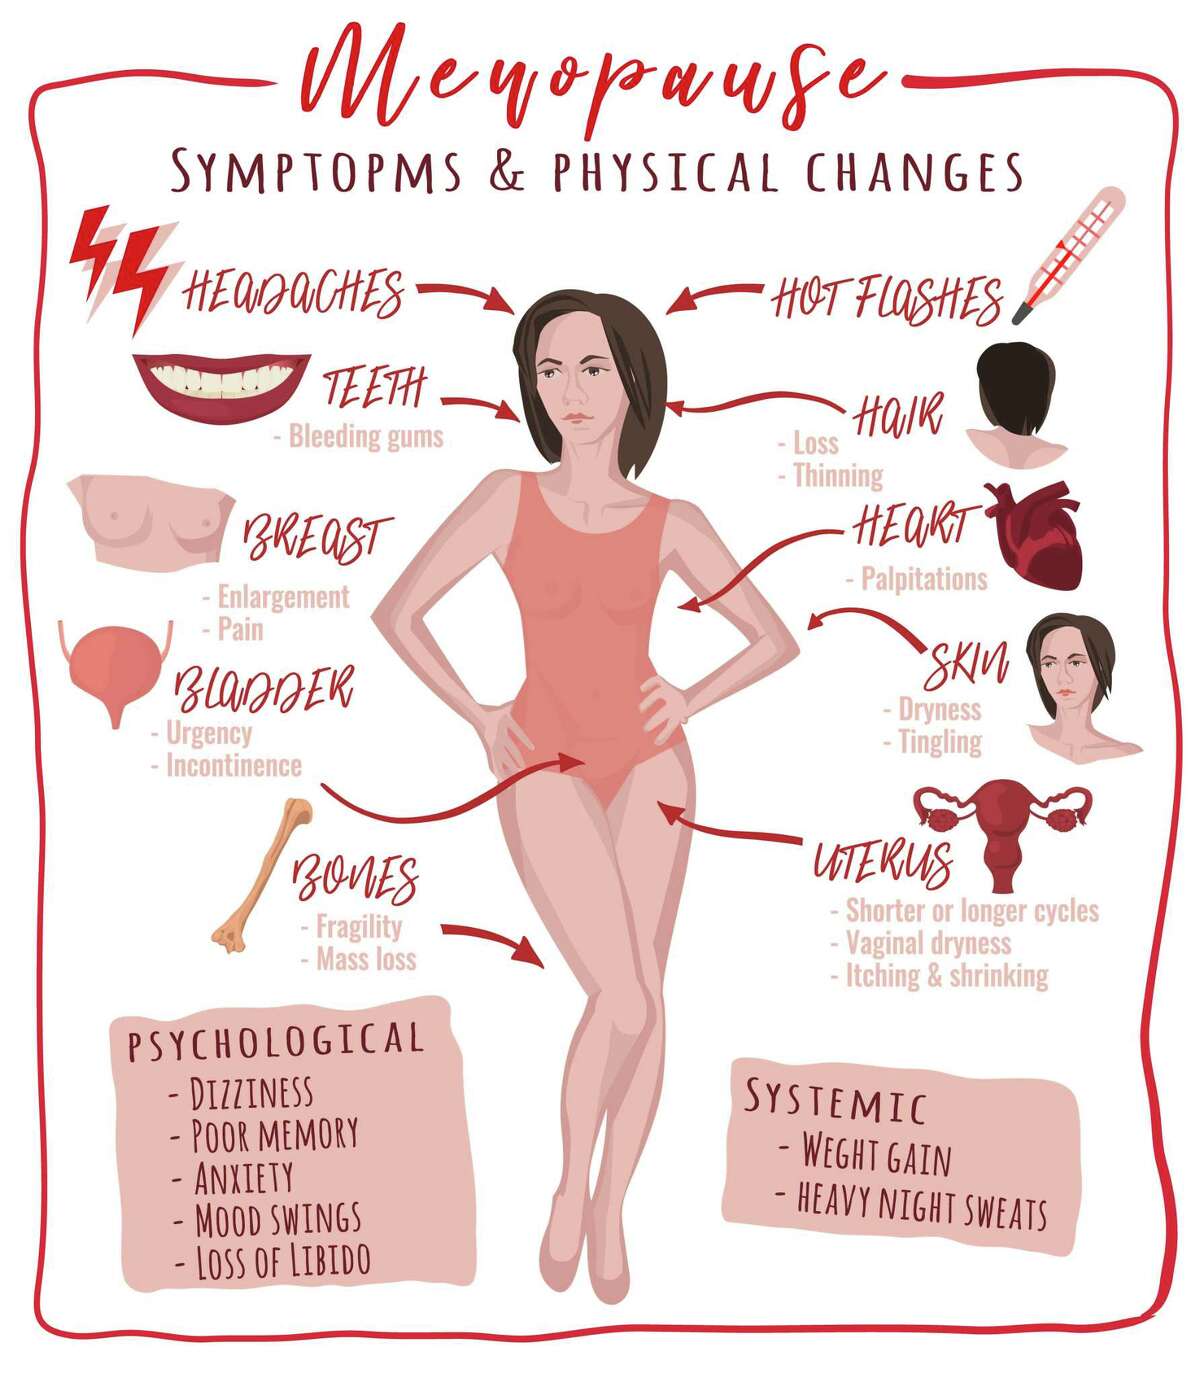 Menopause symptoms and physical changes.